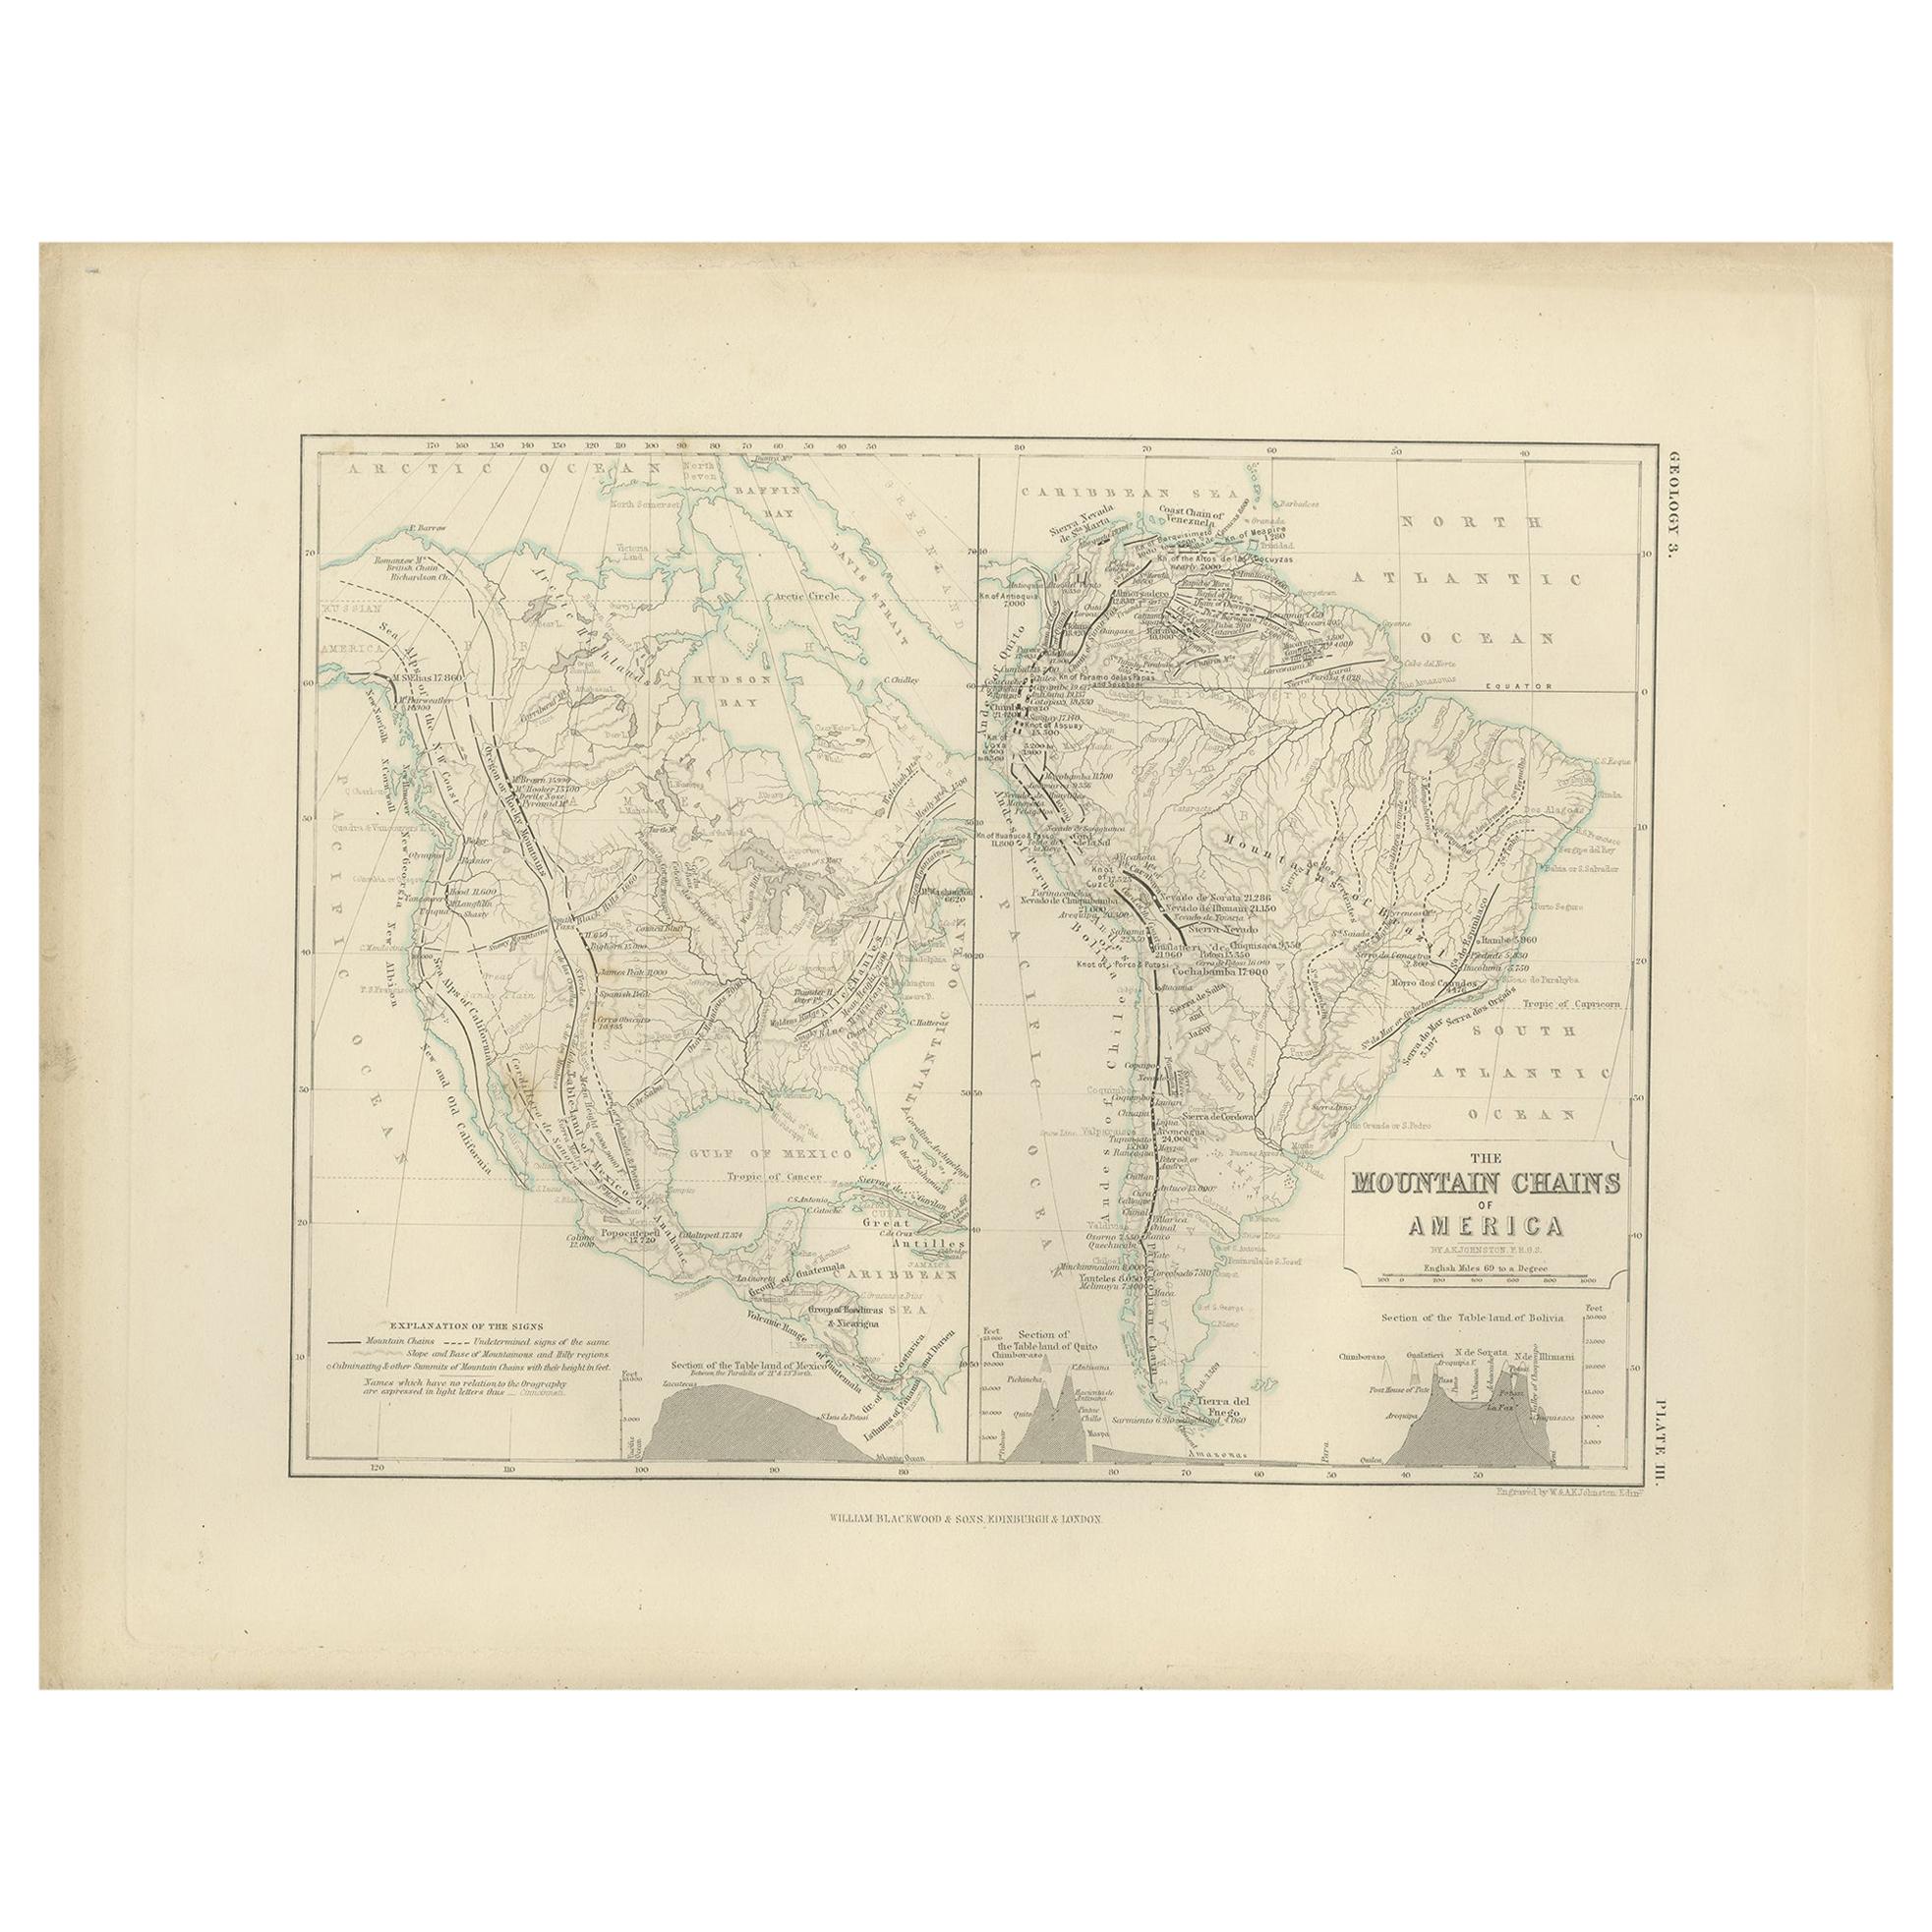 Antique Map of the Mountain Chains of America by Johnston '1850'